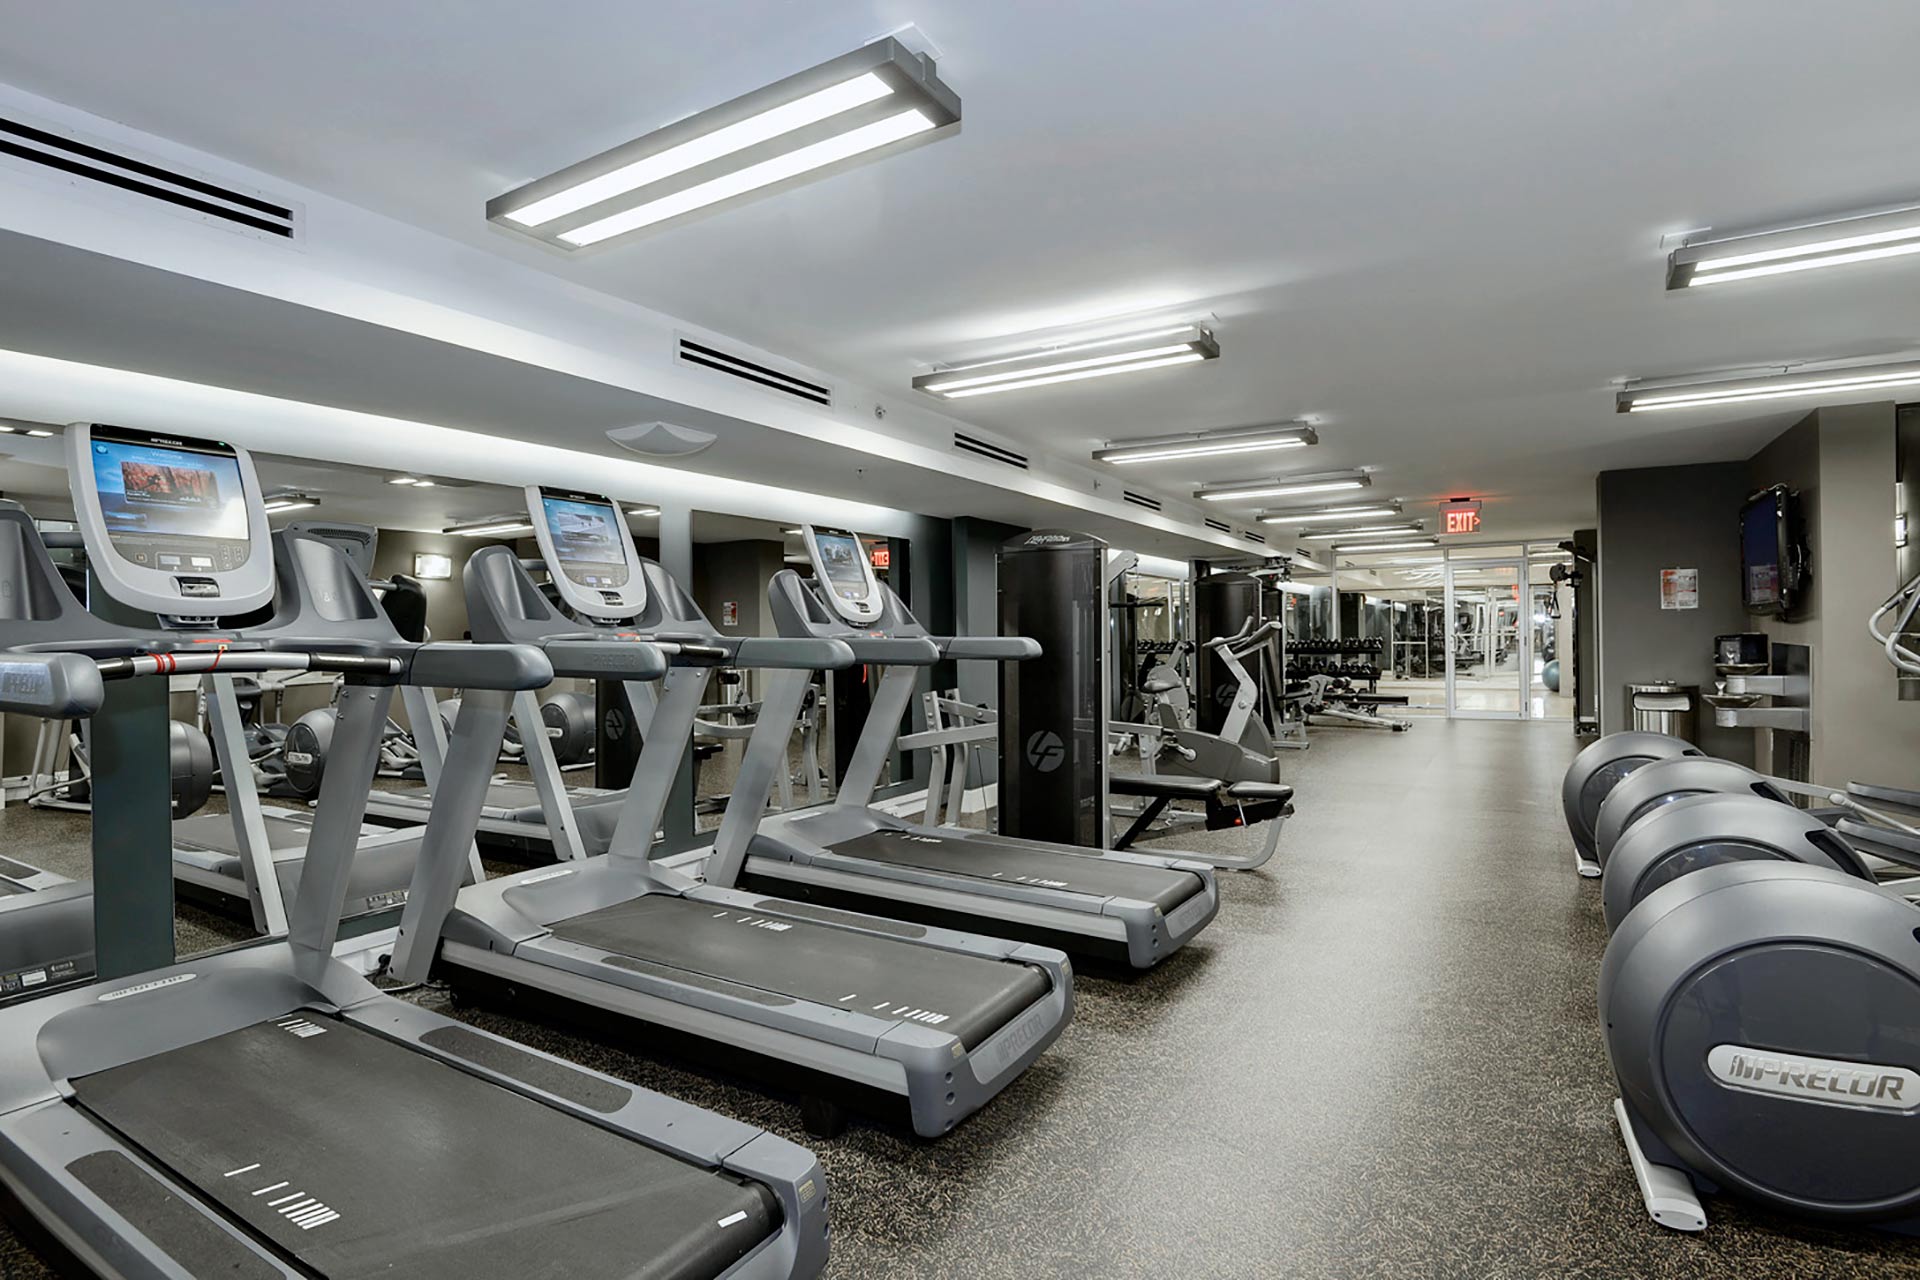 Large fitness room with impact absorbent flooring and cardio equipment along the left, mirrored wall